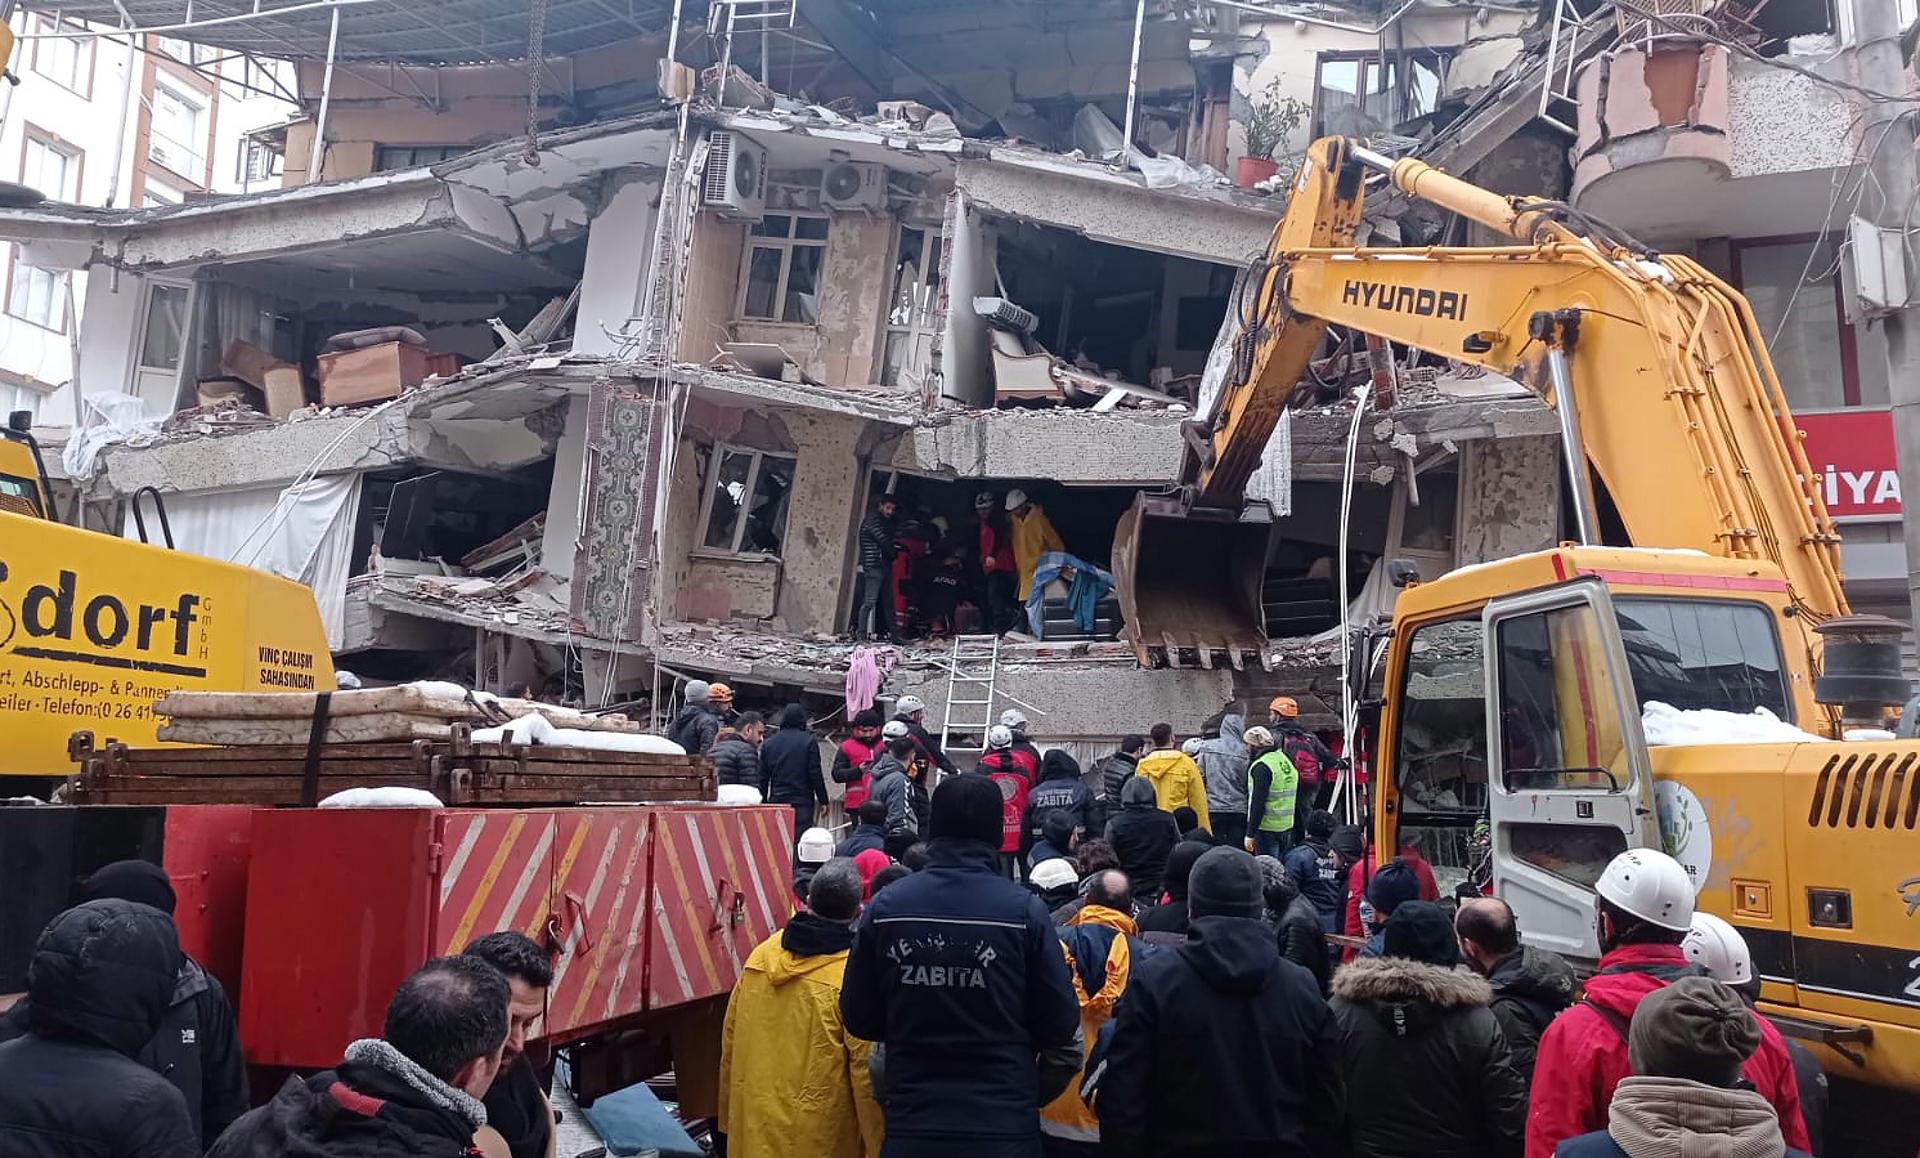 Emergency personnel search for victims at the site of a collapsed building after a powerful earthquake in Diyarbakir, southeast of Turkey, 06 February 2023. According to the US Geological Service, an earthquake with a preliminary magnitude of 7.8 struck southern Turkey close to the Syrian border. The earthquake caused buildings to collapse and sent shockwaves over northwest Syria, Cyprus, and Lebanon. (Terremoto/sismo, Chipre, Líbano, Siria, Turquía) EFE/EPA/DENIZ TEKIN